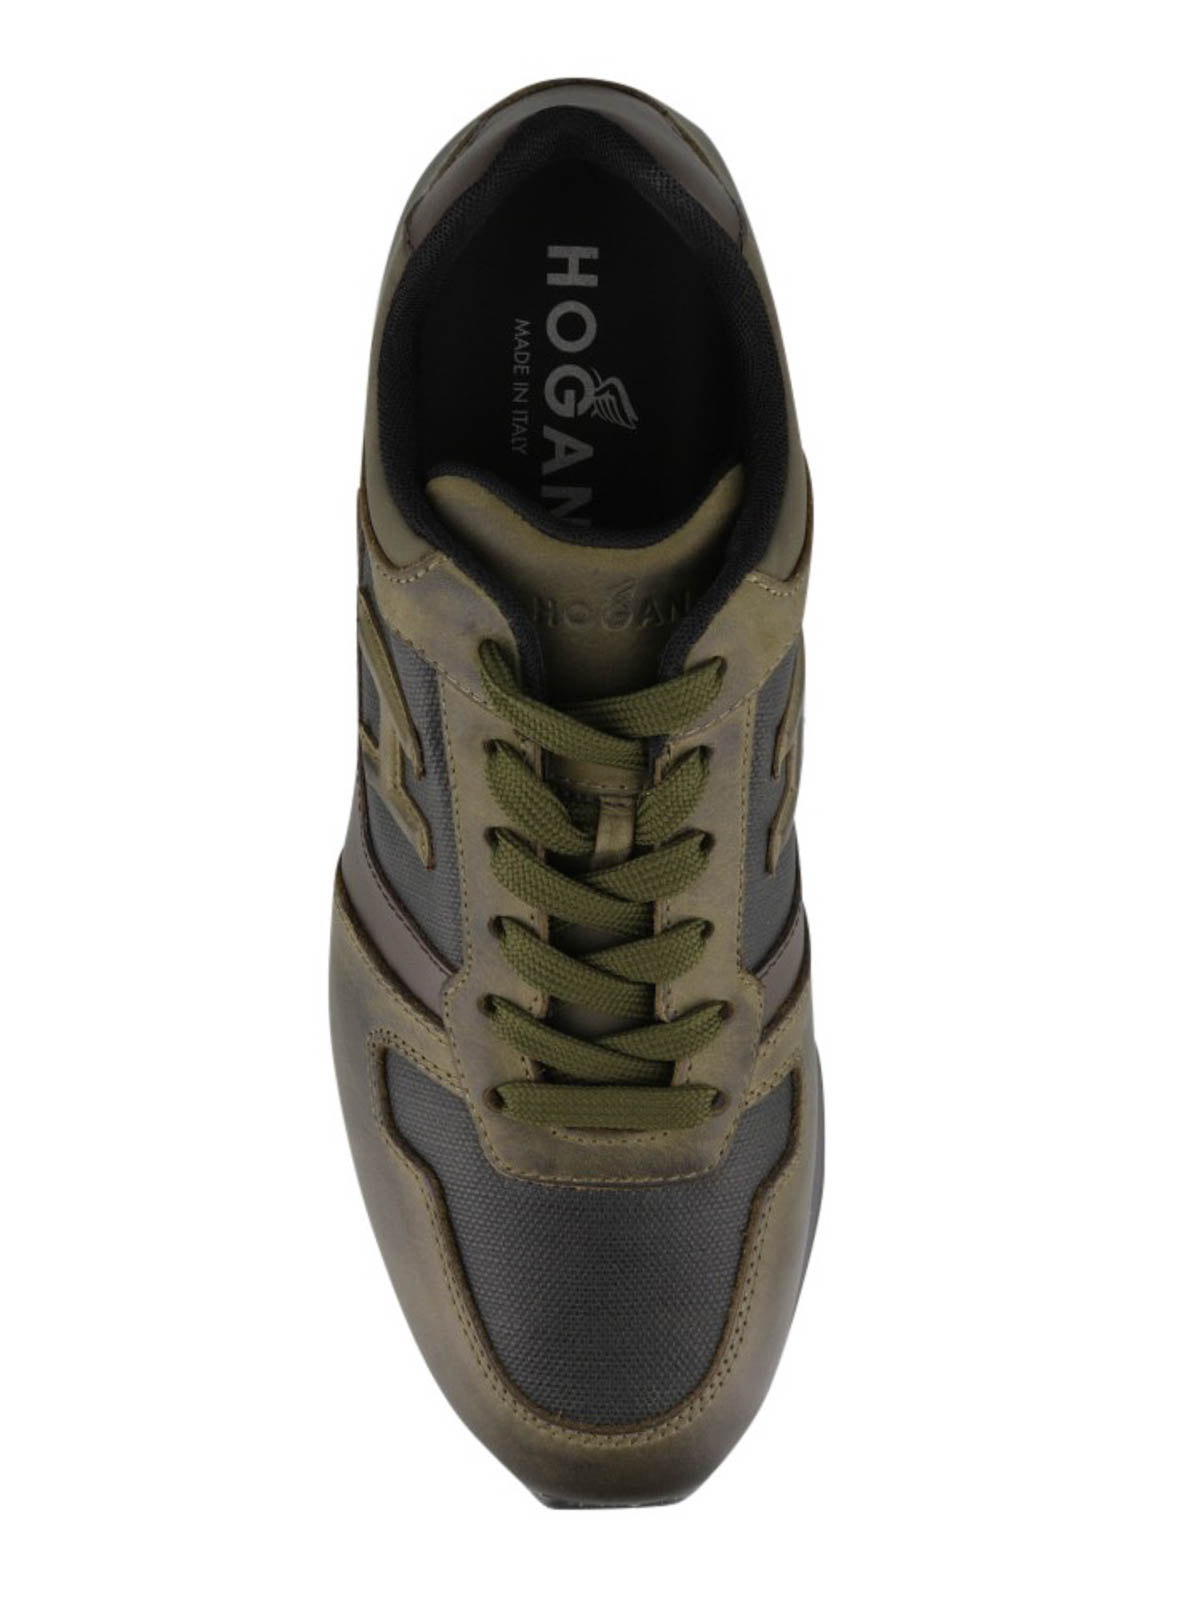 Dader inflatie band Trainers Hogan - H321 sneakers - HXM3210Y850OA7818Z | Shop online at iKRIX